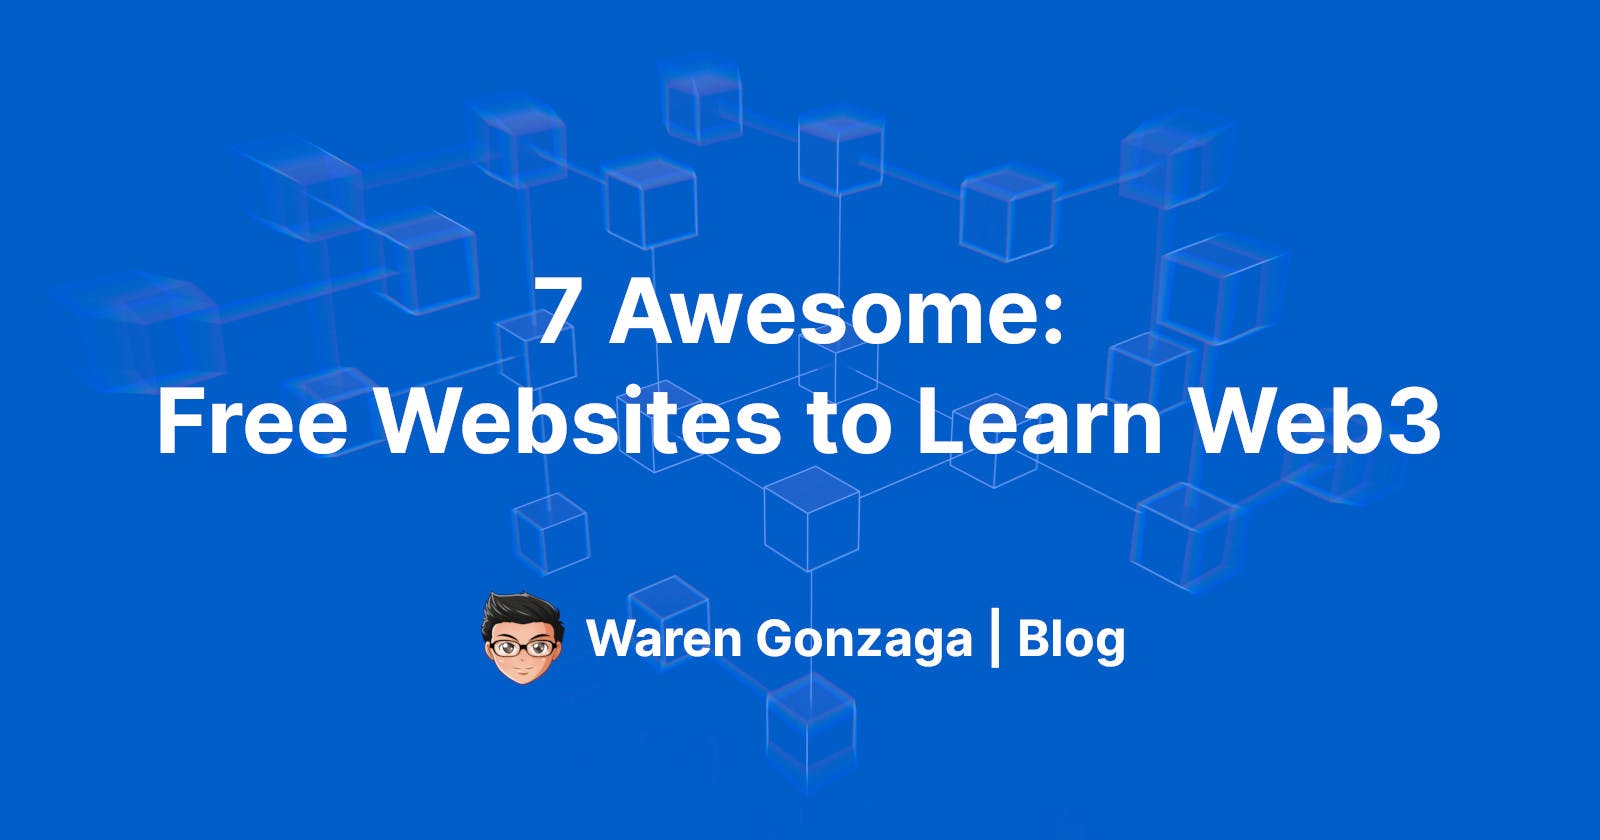 7 Awesome: Free Websites to Learn Web3